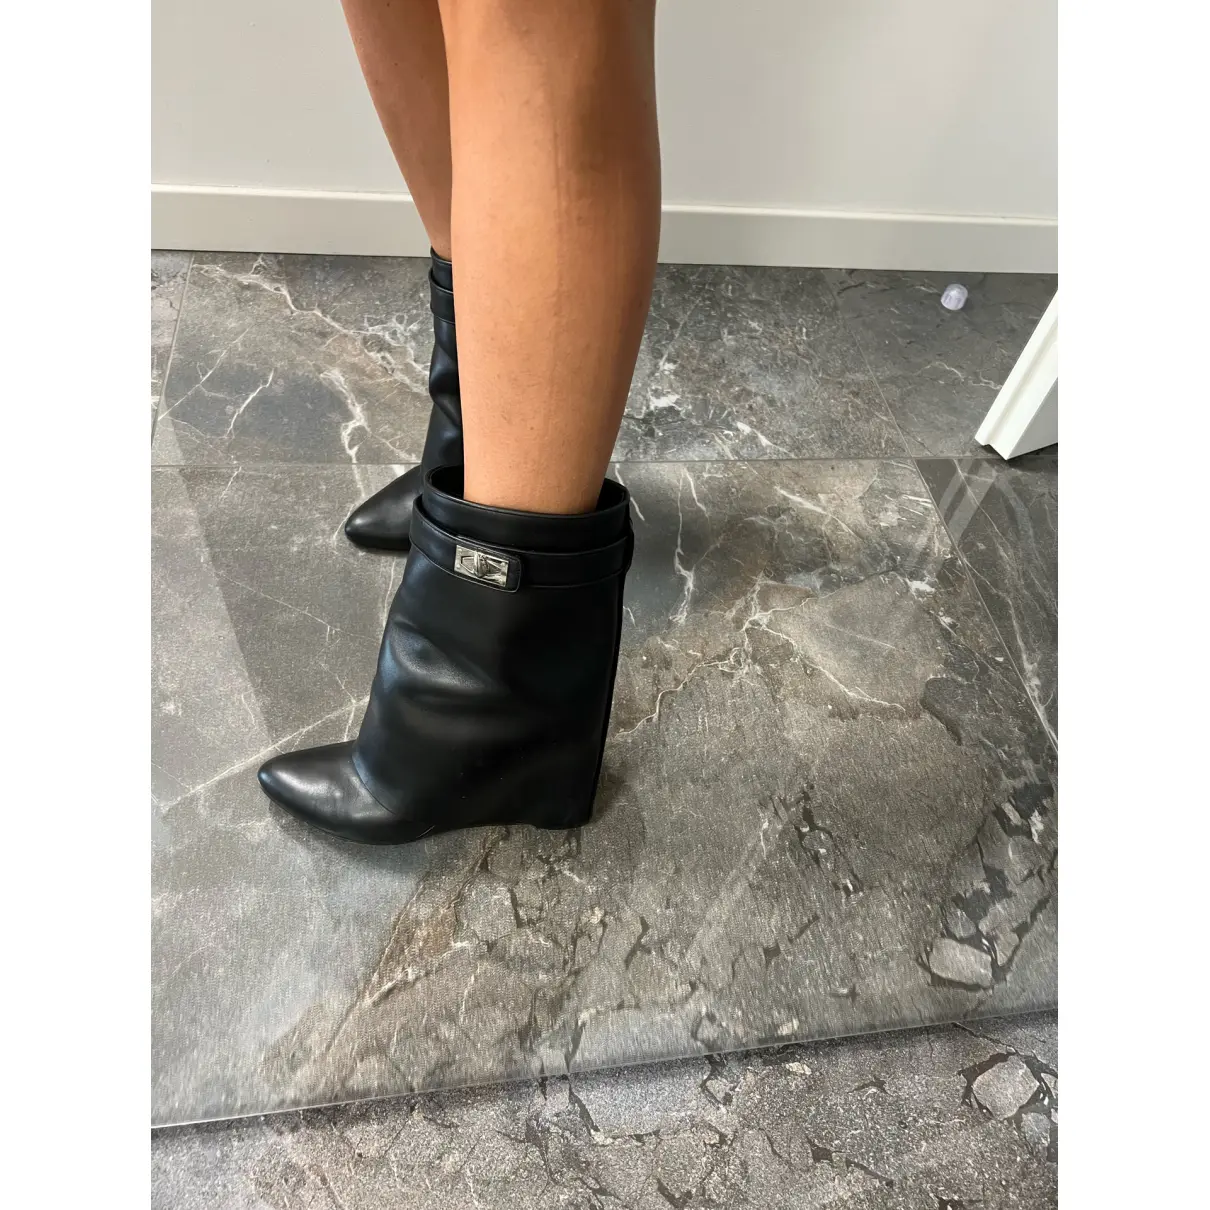 Buy Givenchy Shark leather ankle boots online